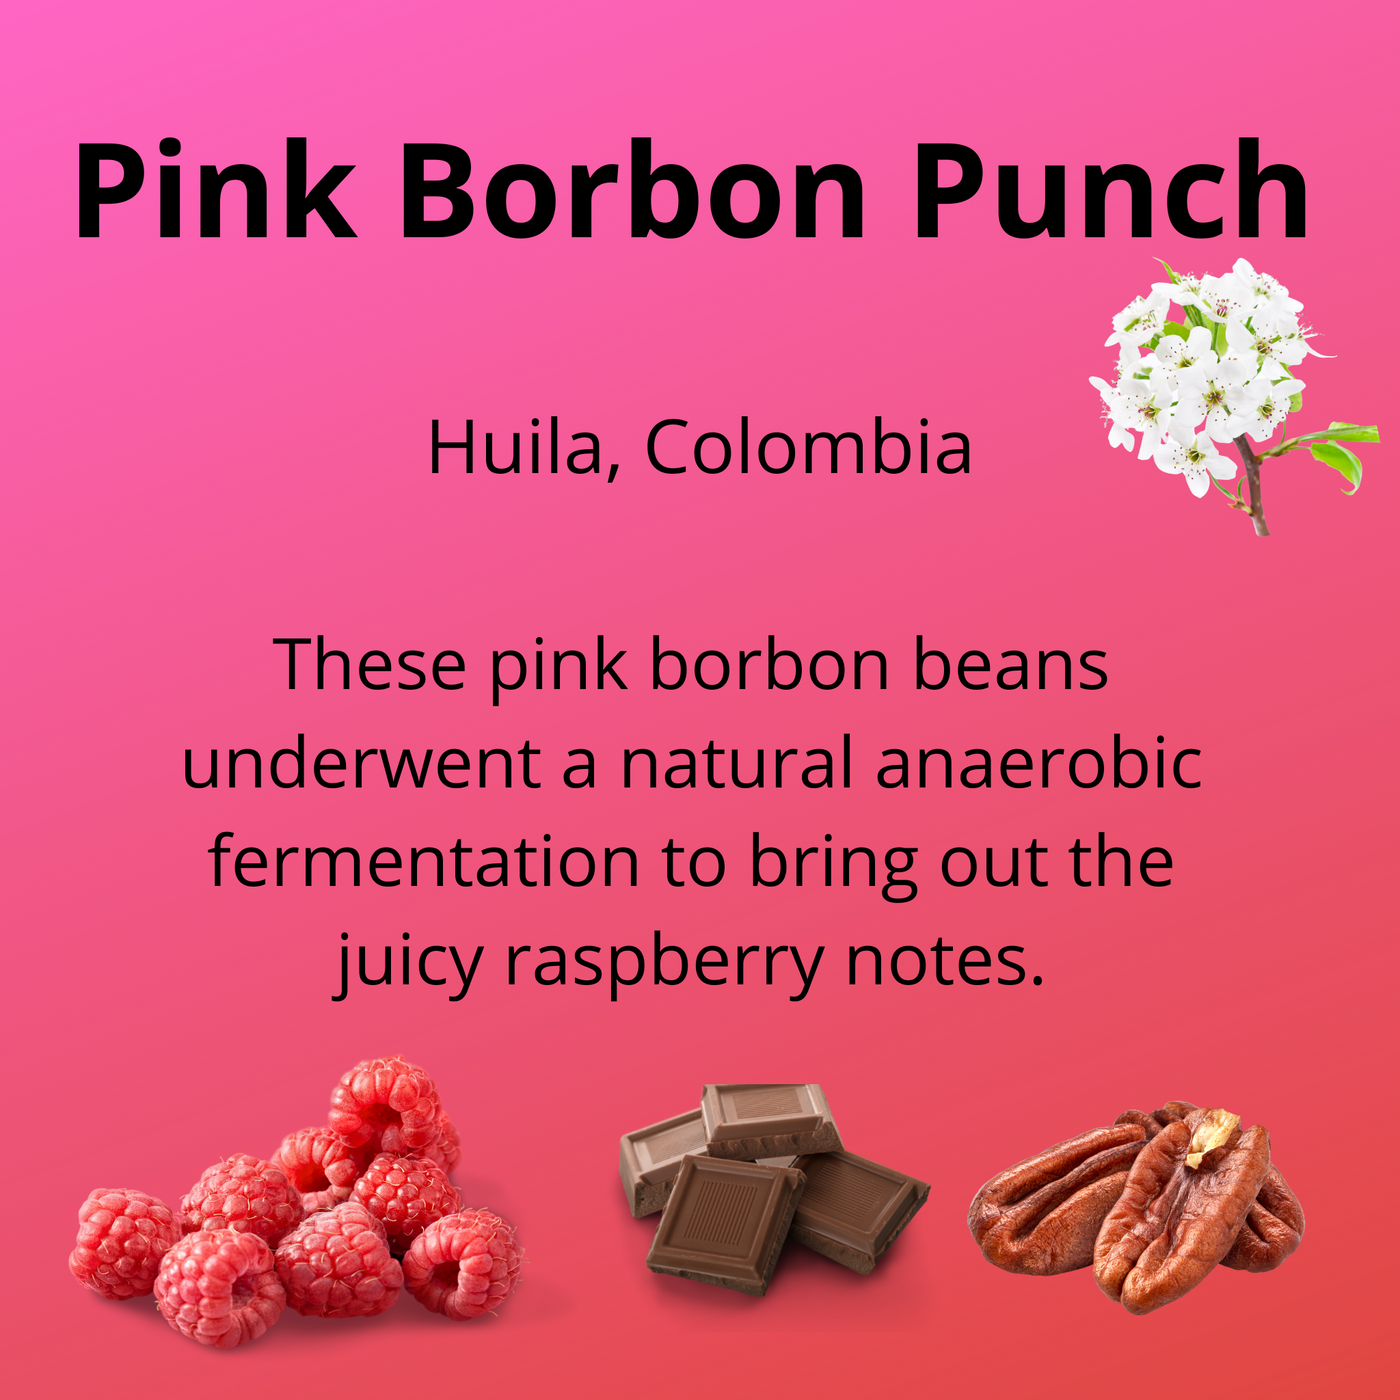 Pink Borbon Punch, Huila, Colombia, these pink borbon beans underwent a natural anaerobic fermentation to bring out the juicy raspberry notes, tasting notes, elderflower, raspberries, milk chocolate, pecans